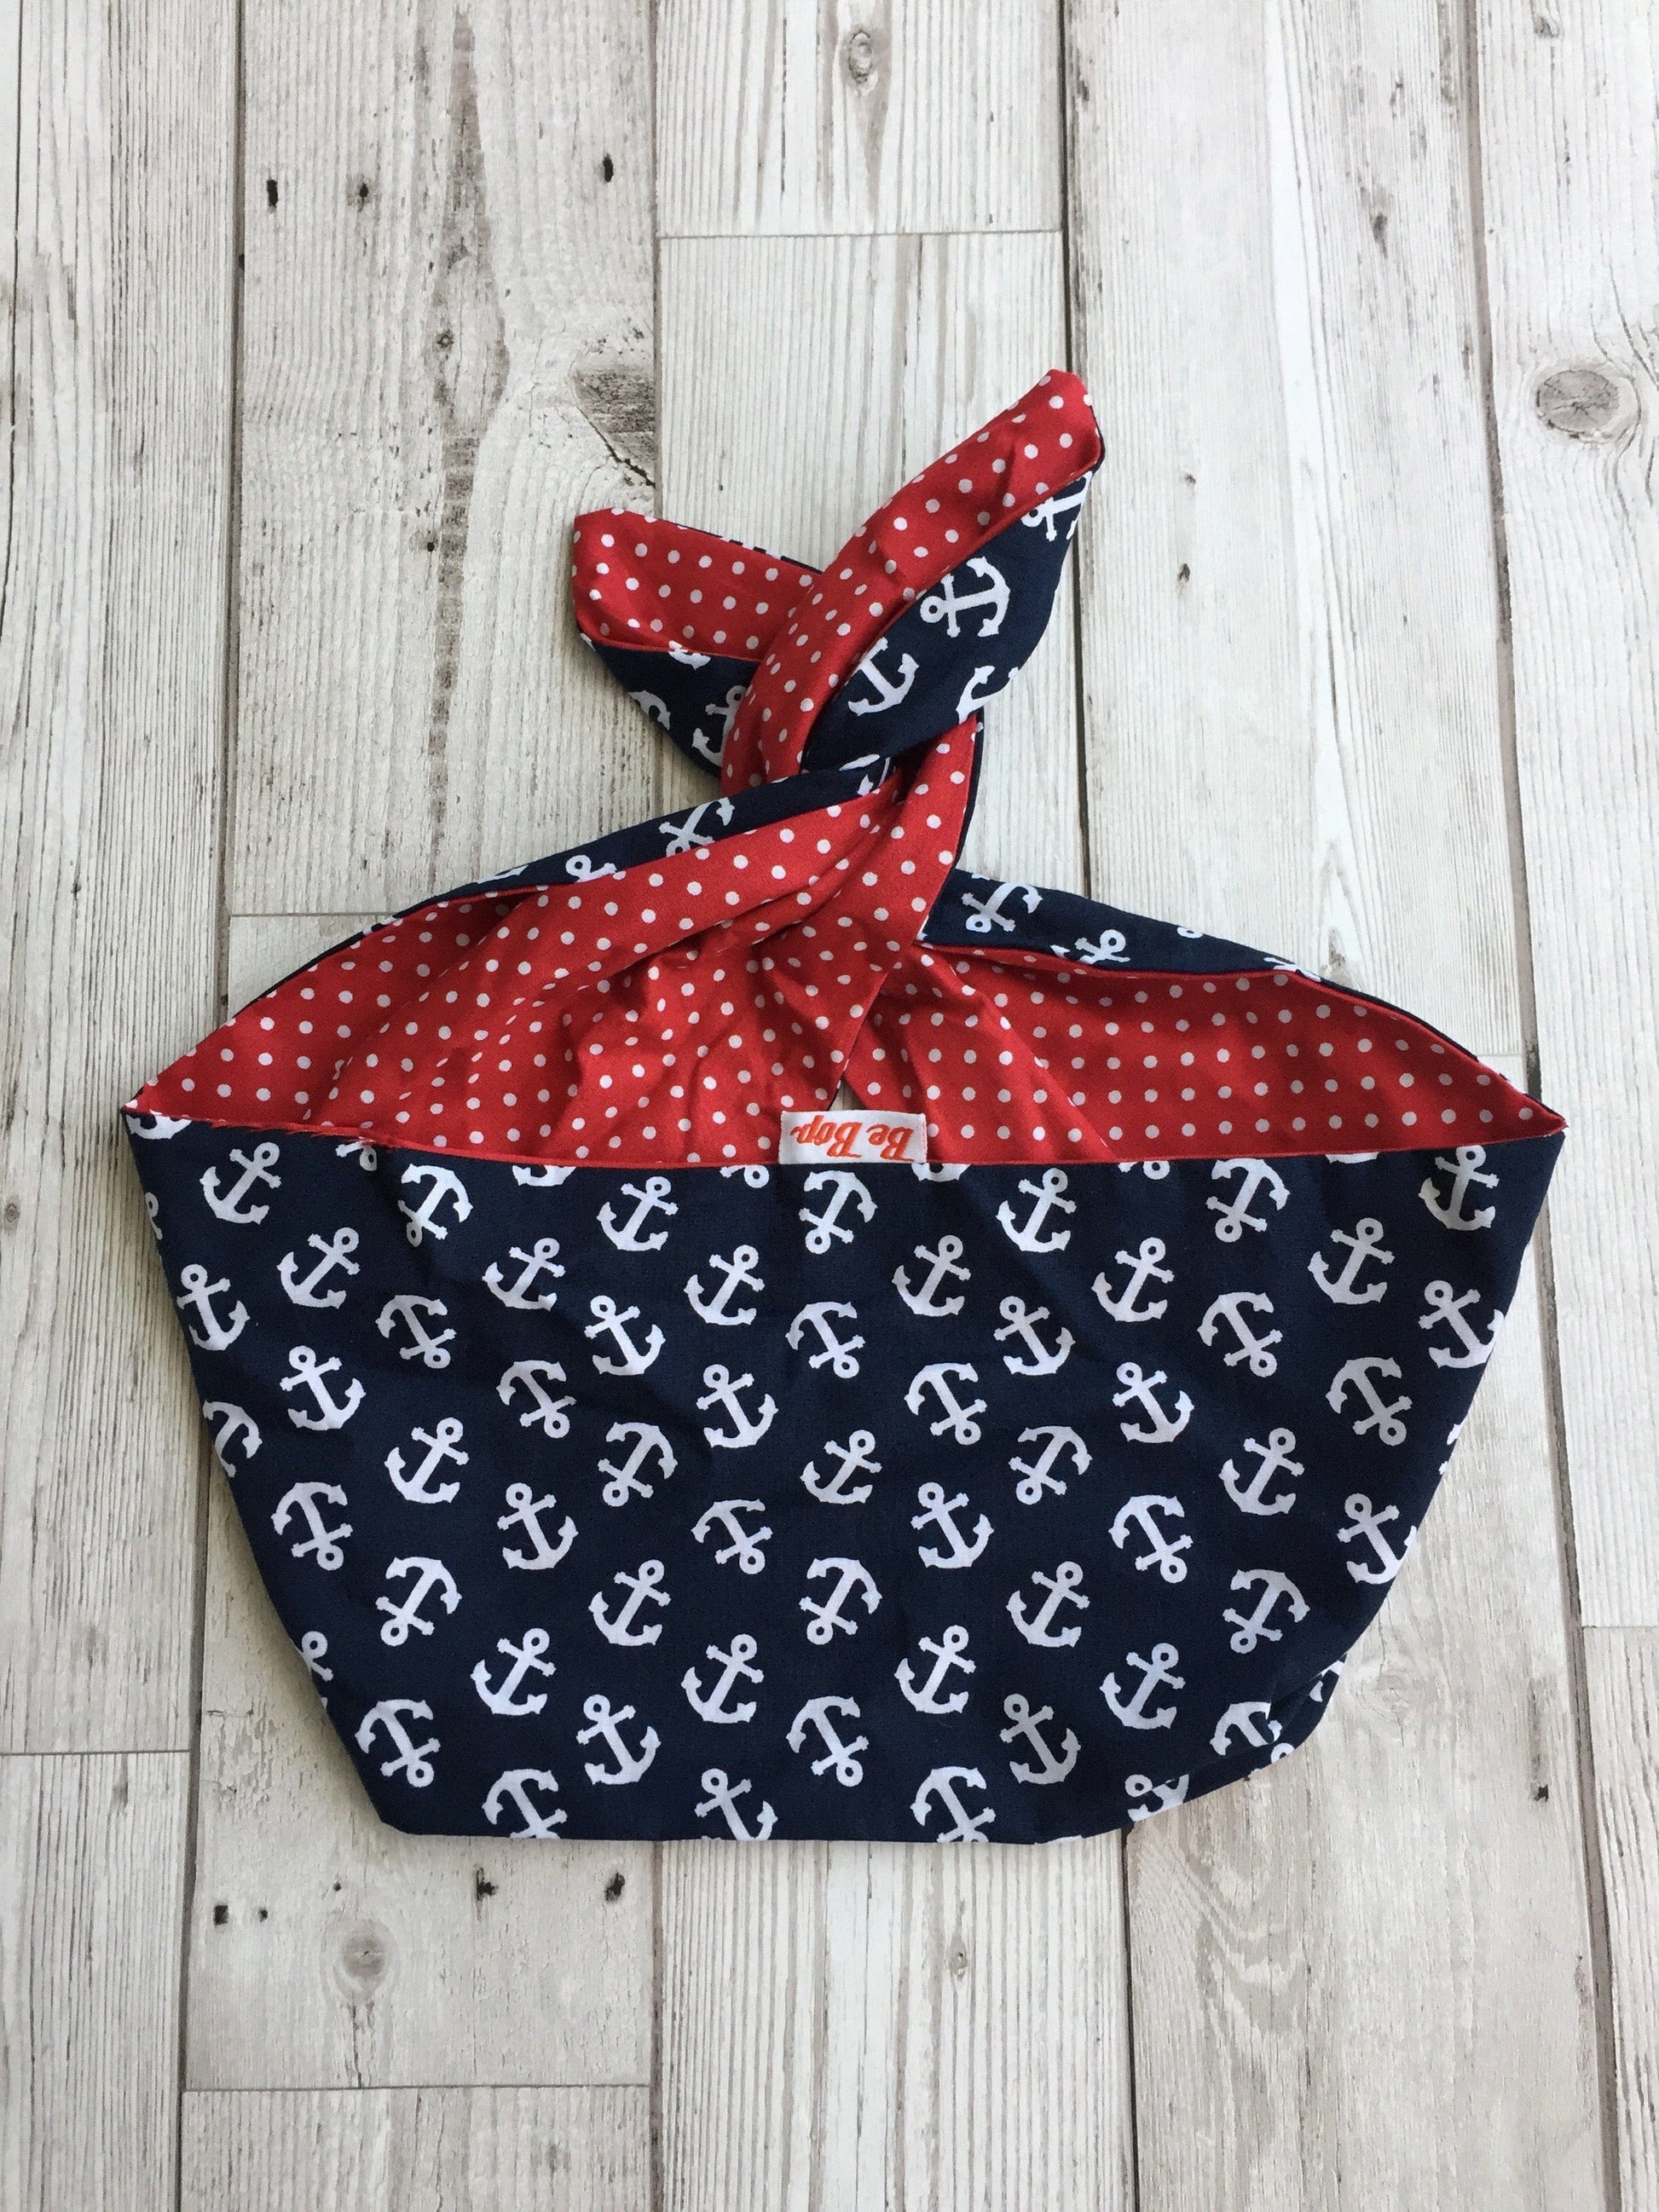 BettyliciousUK Head Scarf, Navy/White Anchor Print with Red Polka Dot Reverse